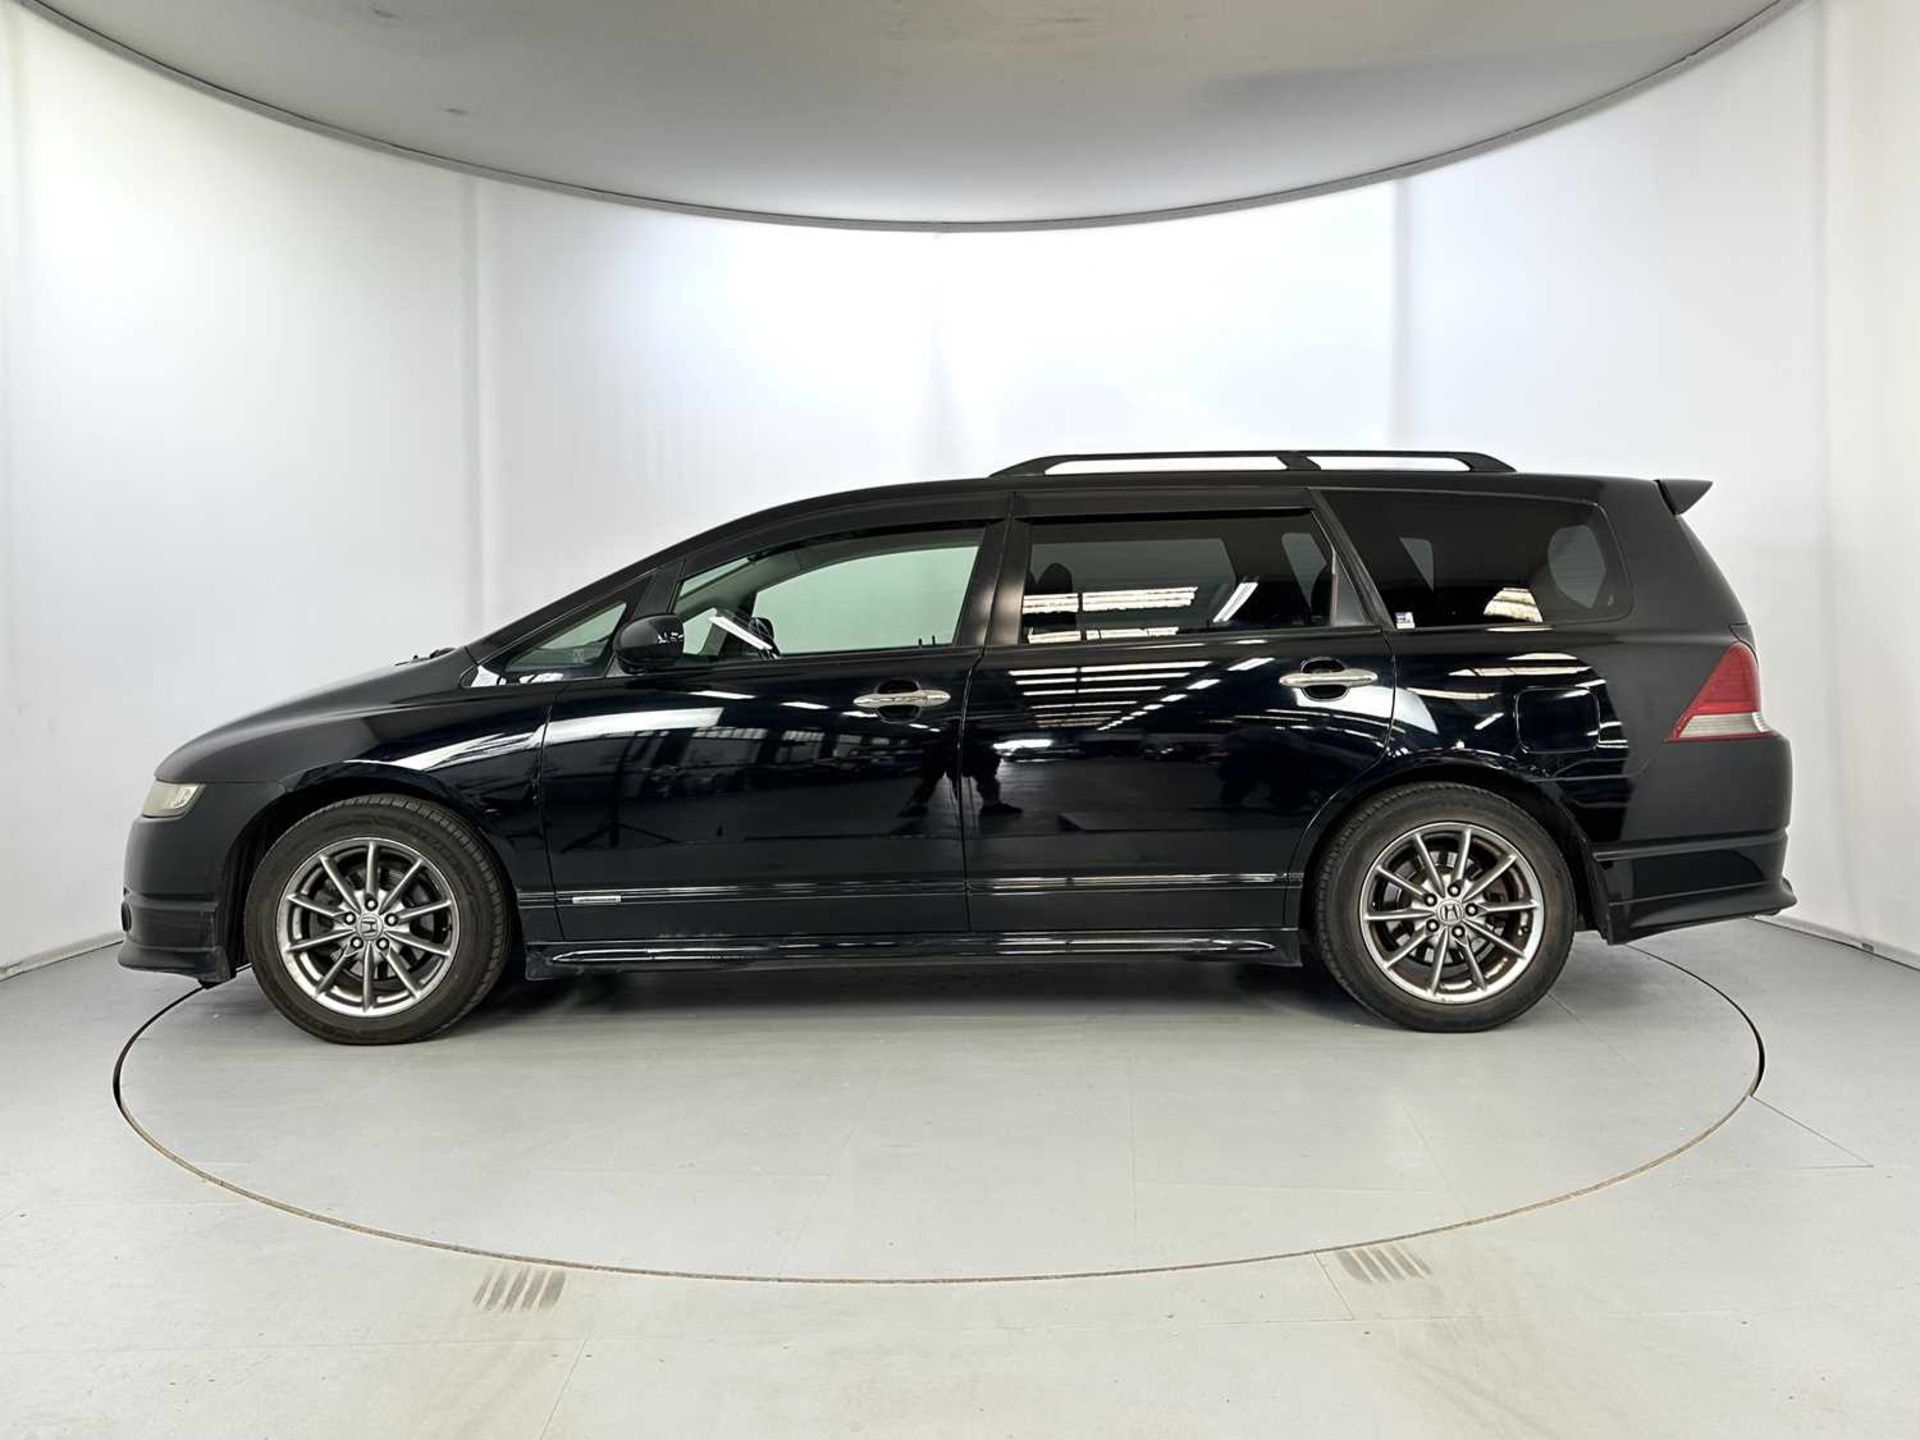 2005 Honda Odyssey RB1 Absolute - Image 5 of 36